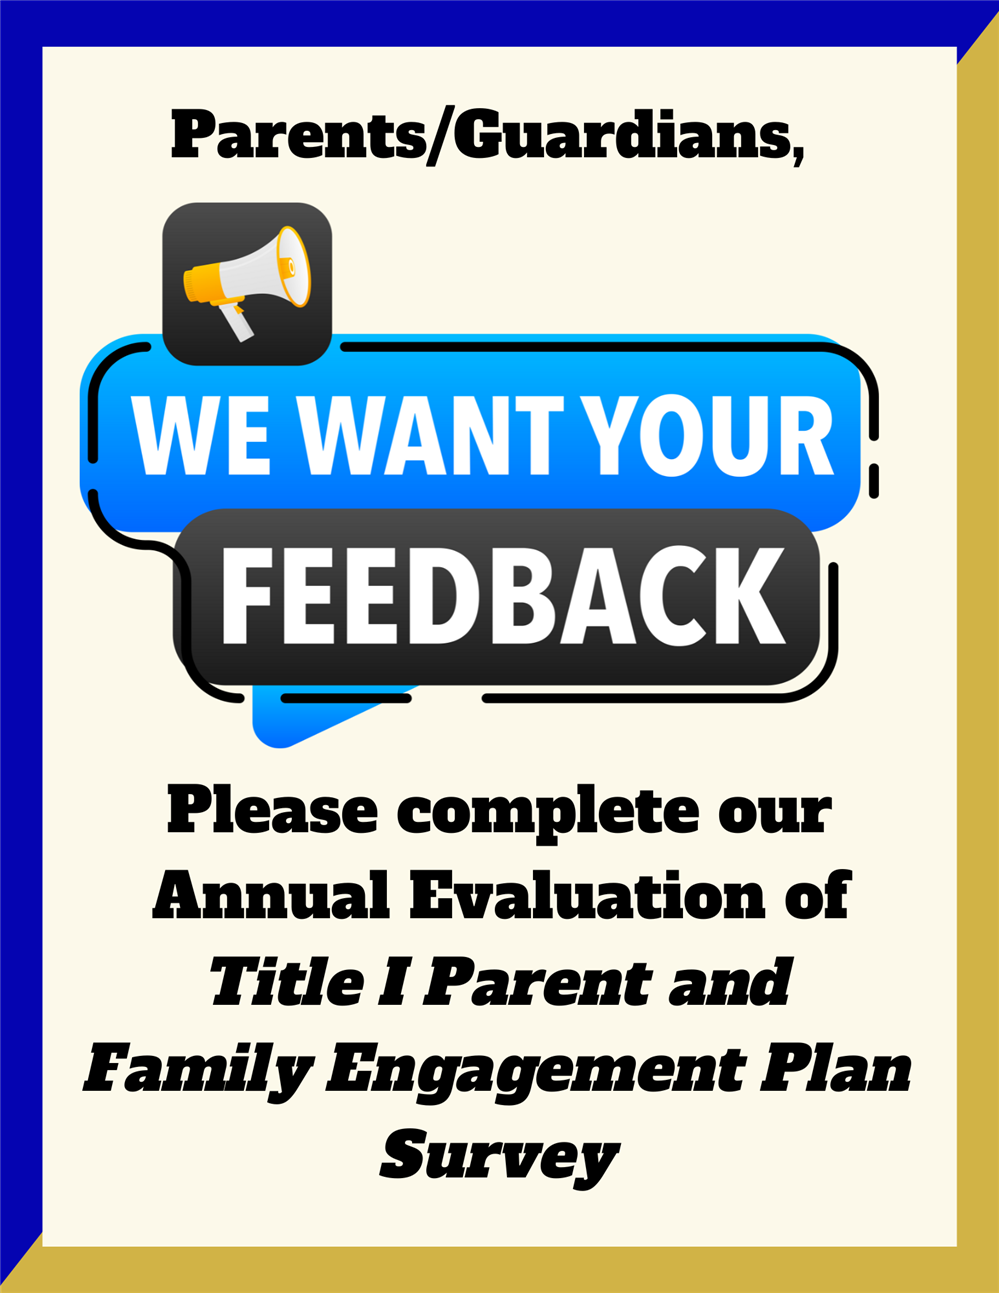  CLICK HERE to take our Annual Evaluation of Title I Parent and Family Engagement Plan Survey